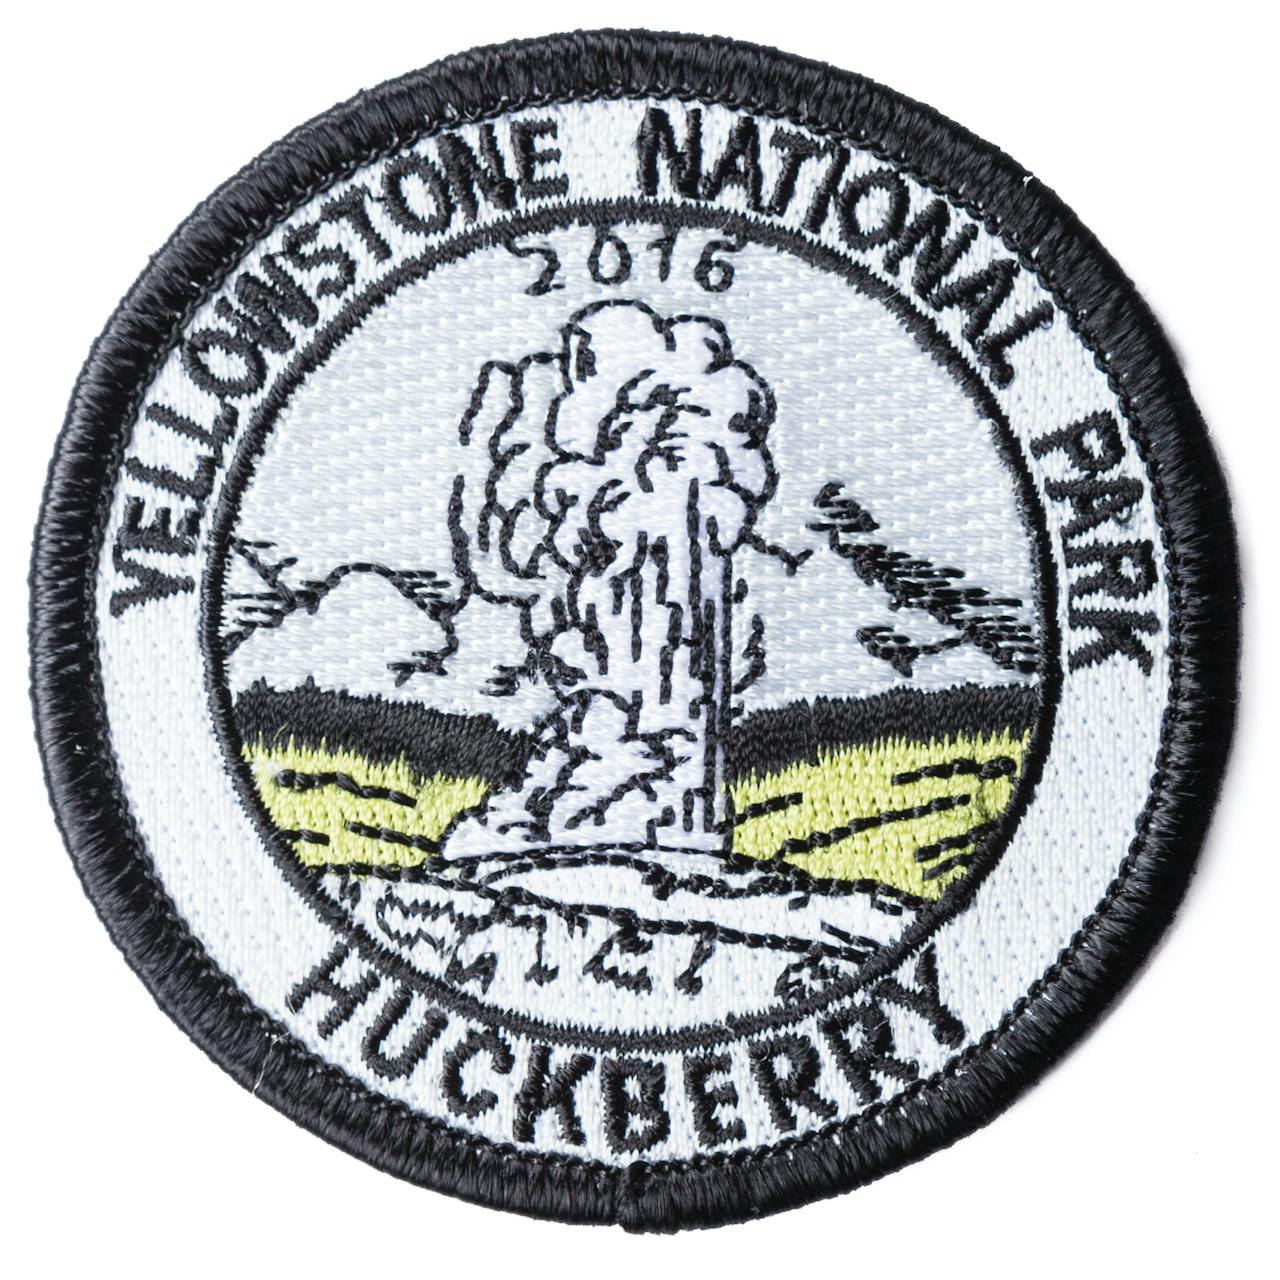 Huckberry Yellowstone National Park Patch